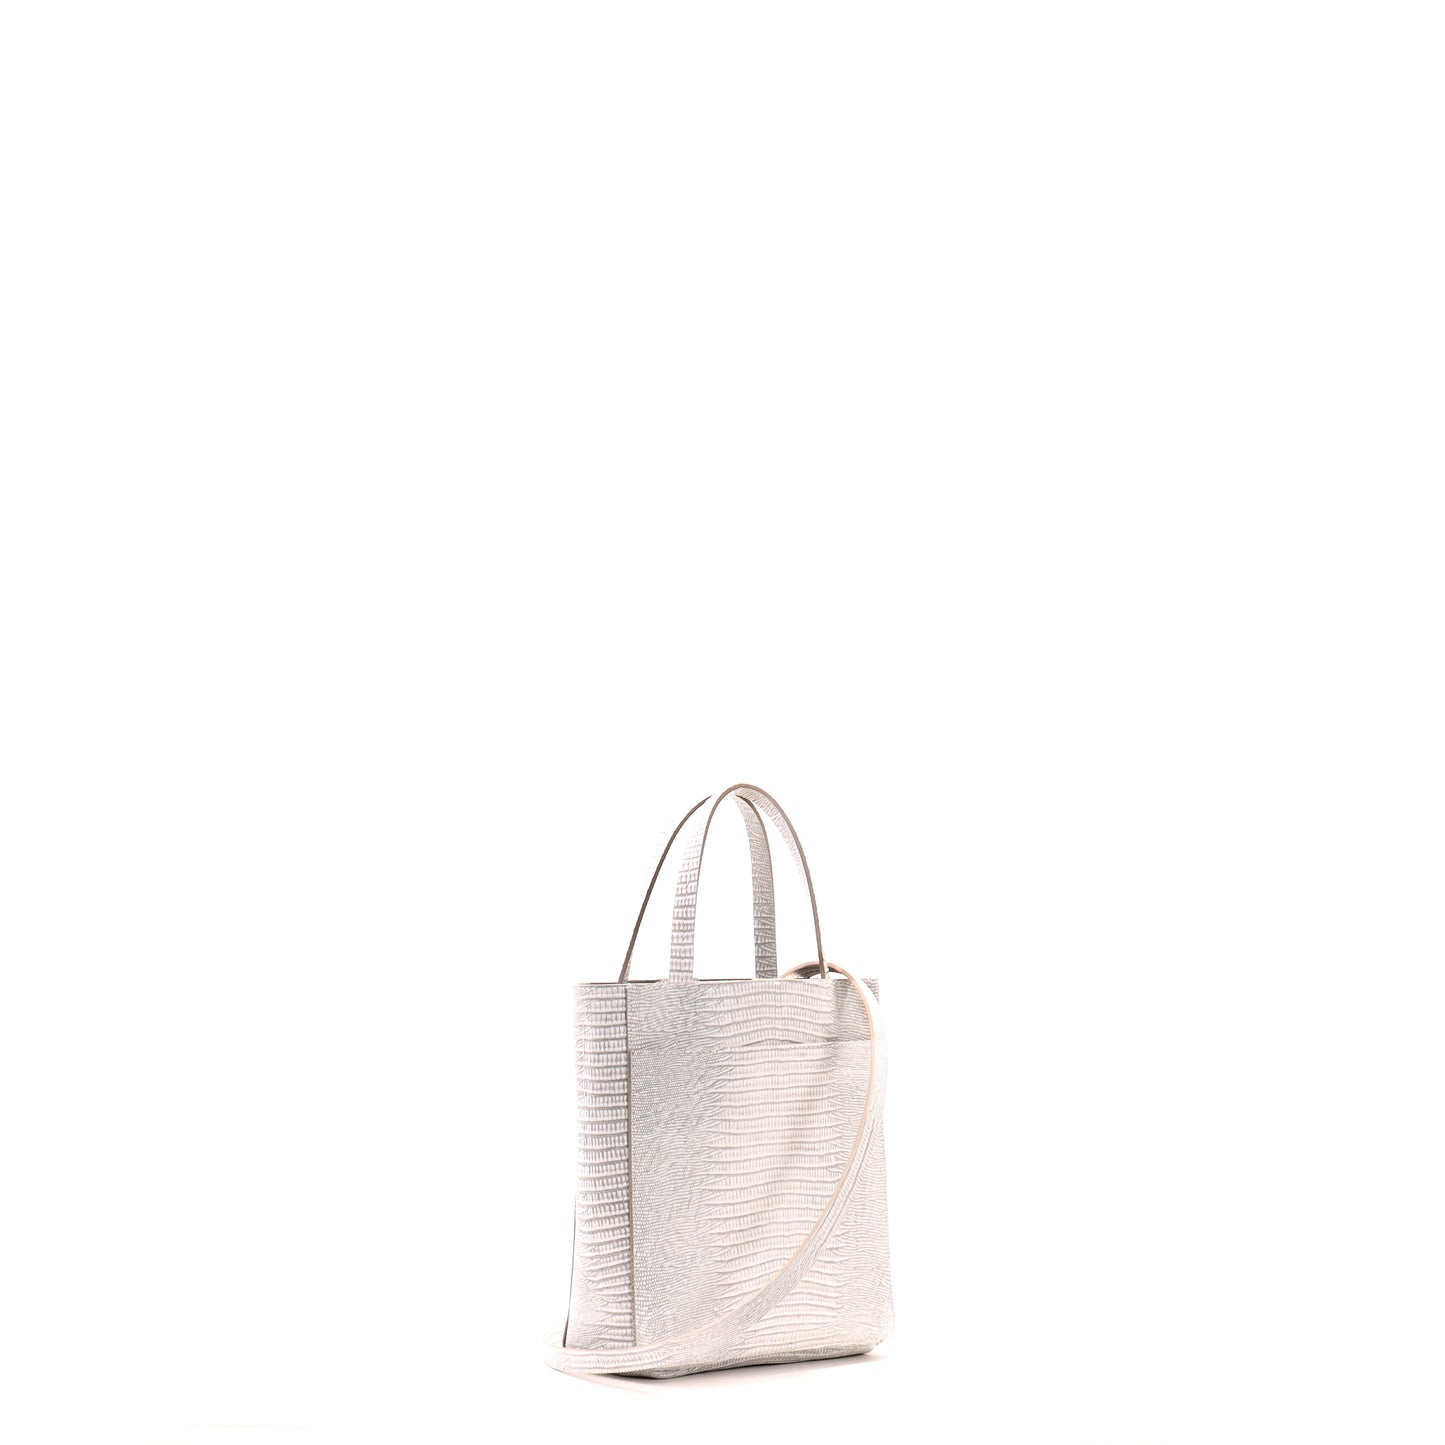 SMALL FRONT POCKET TOTE ANTIQUE WHITE EMBOSSED LIZARD